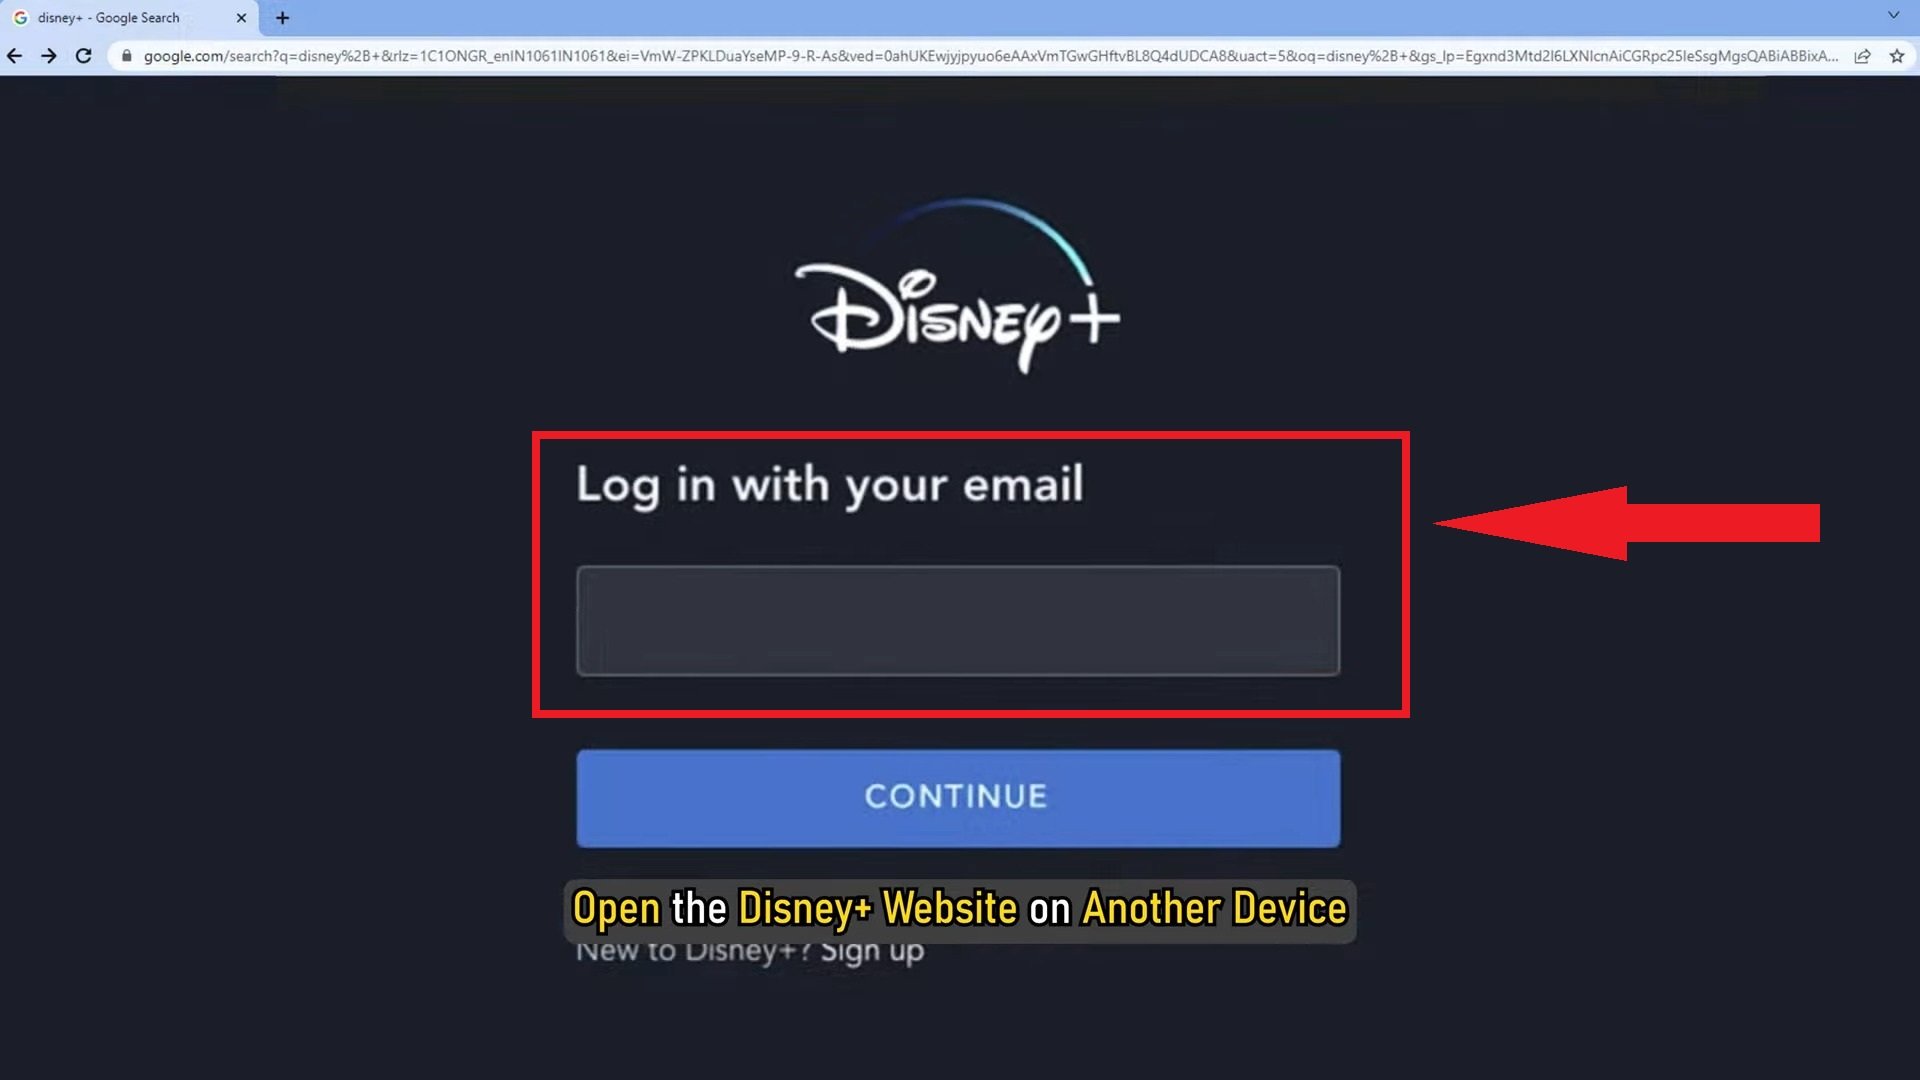 Log in to your Disney Plus account on this page